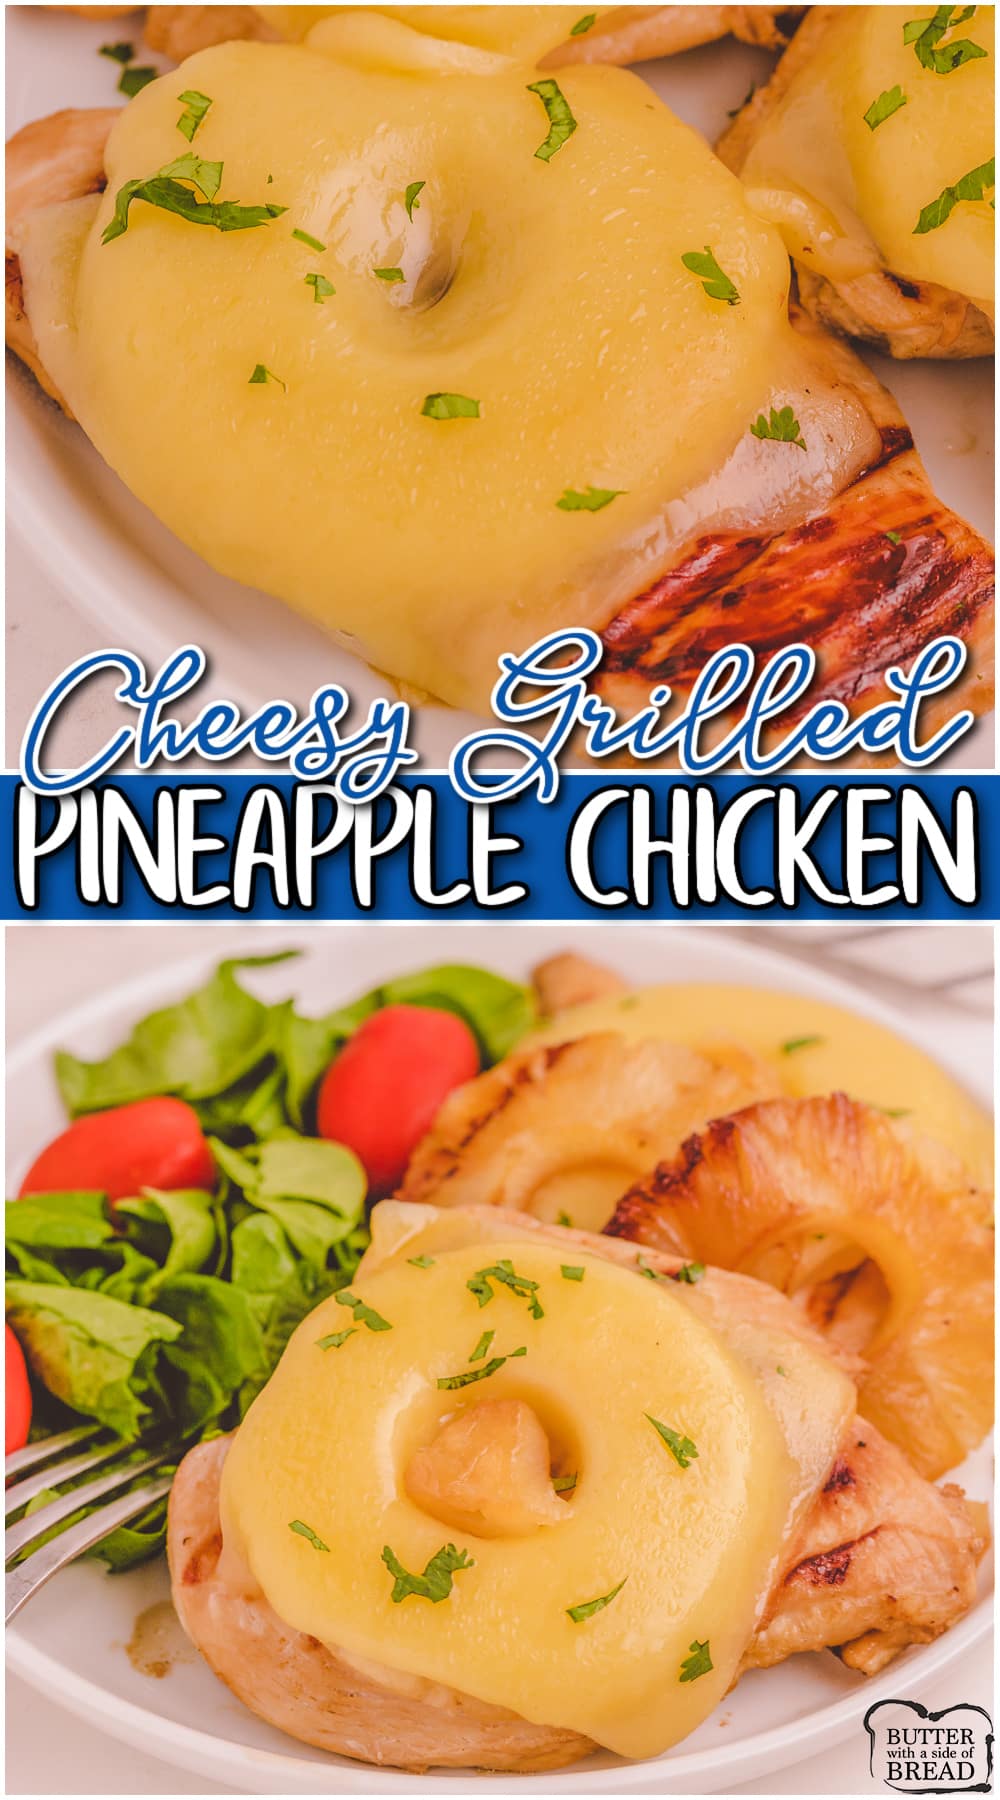 Cheesy Grilled Pineapple Chicken made with an easy marinade & topped with grilled pineapple and a slice of jack cheese. Tender, juicy grilled chicken recipe with fantastic flavor!